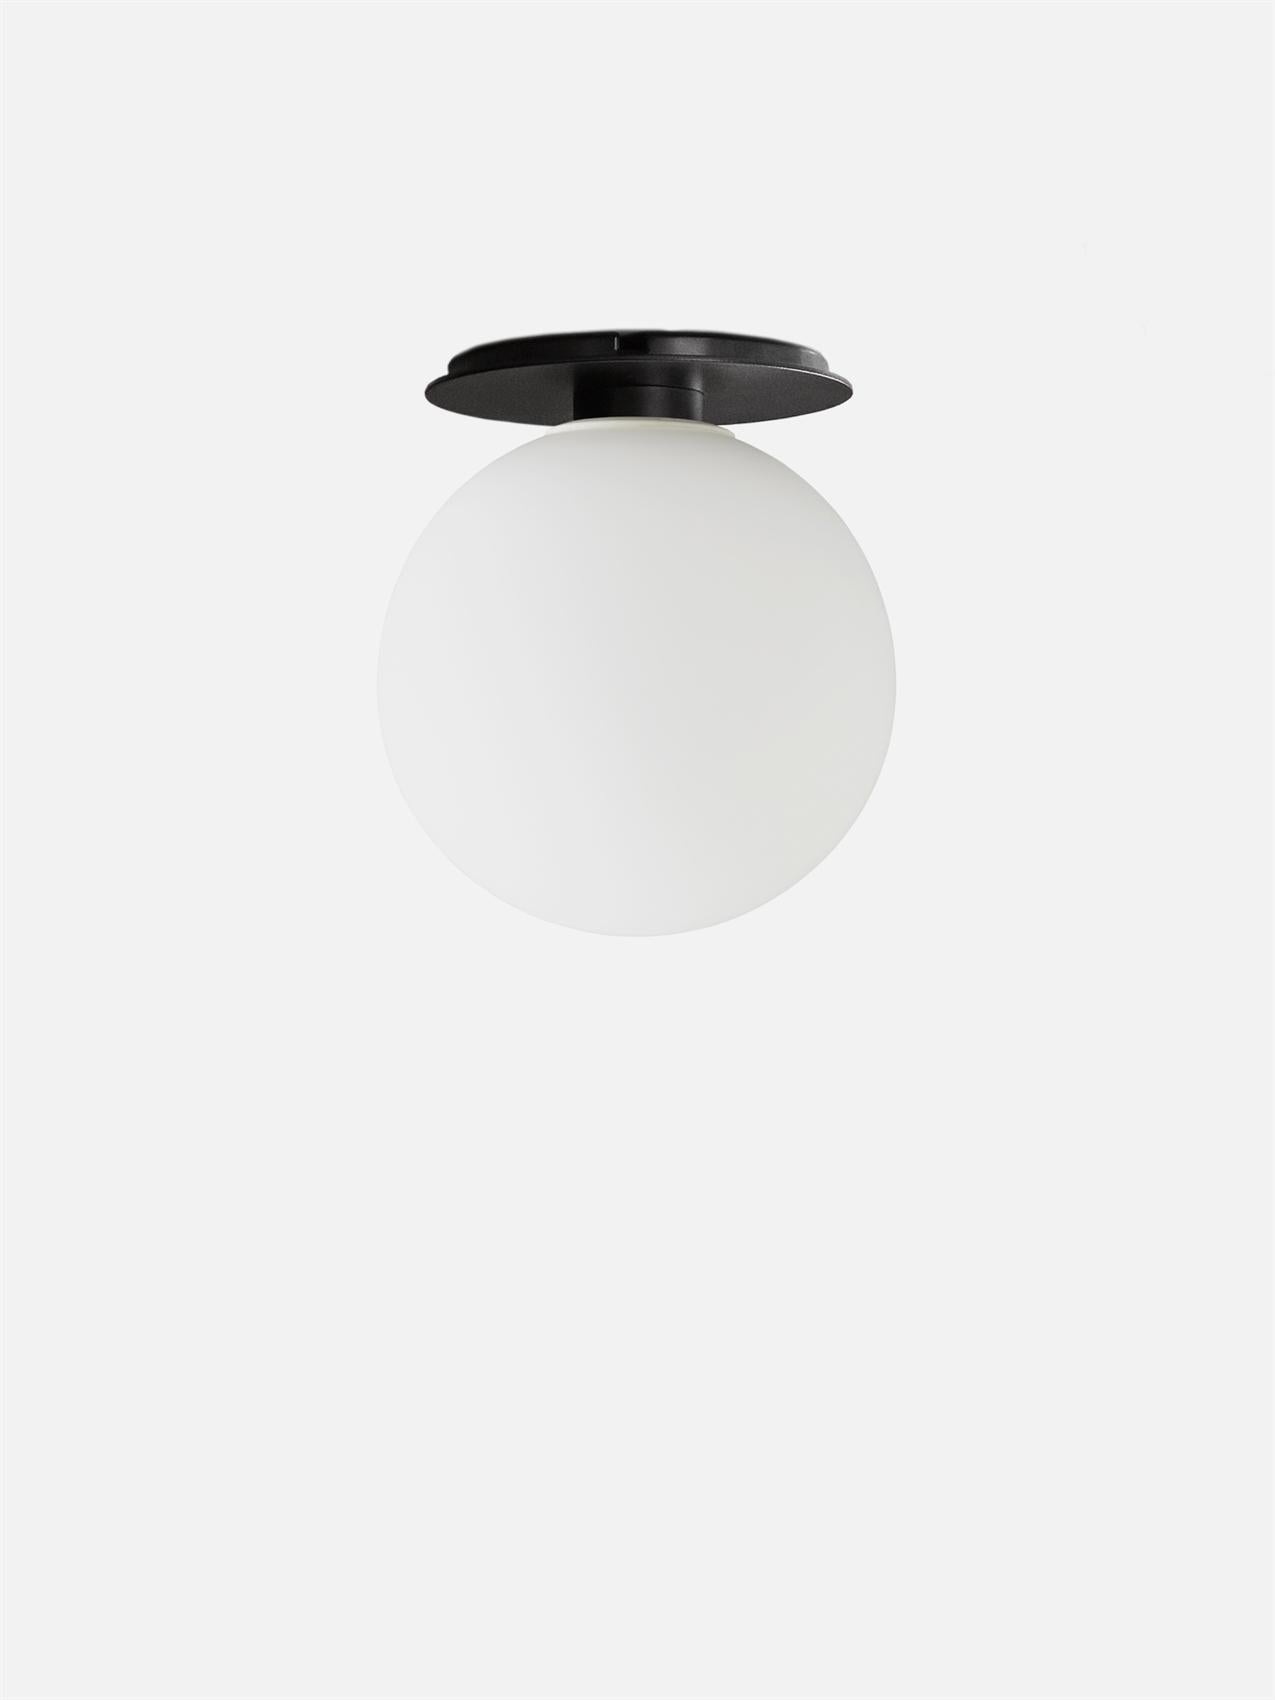 TR Bulb, ceiling/wall lamp, black, Matte Opal Rundle never knows when inspiration will strike. “An idea will often form from a simple observation or noticing a problem, and I’ll keep it at the back of my mind for some time before acting on it. Once